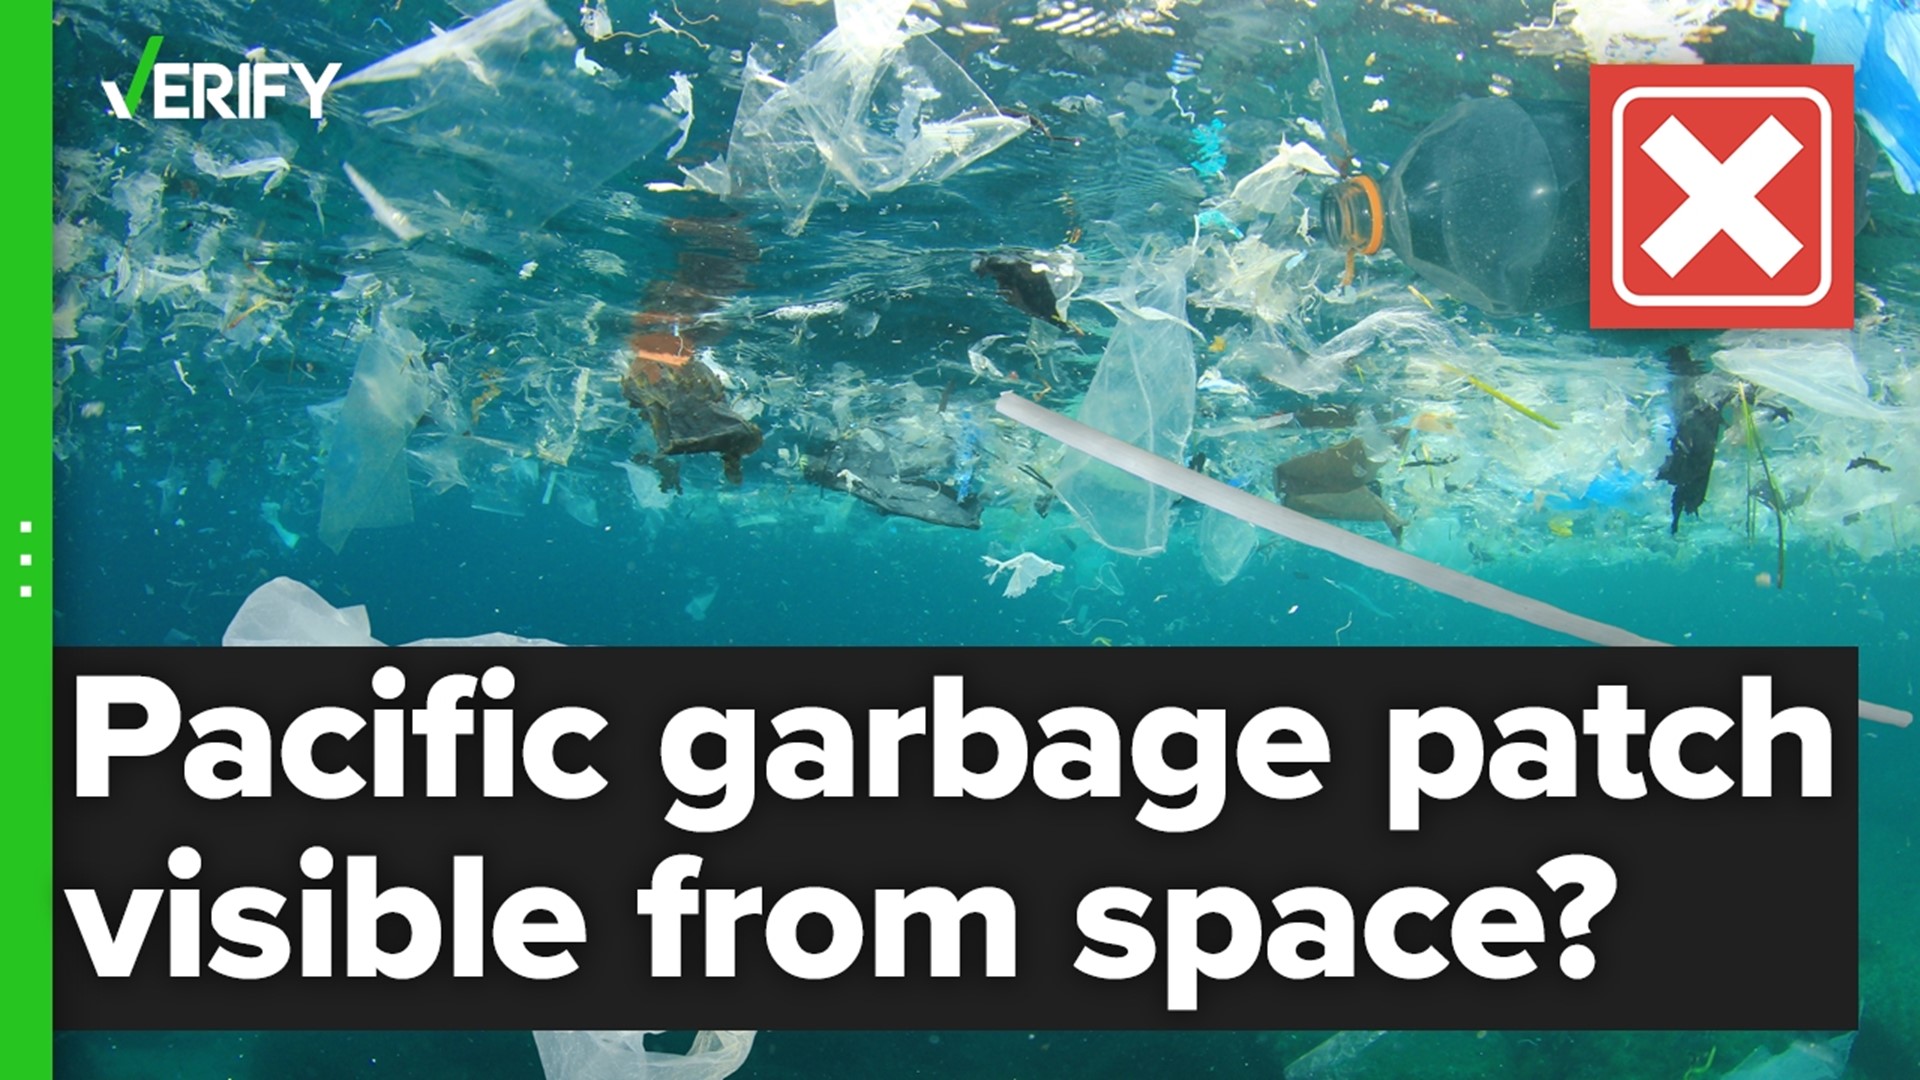 The Great Pacific Garbage Patch is a large collection of marine debris that can be seen floating on the ocean surface. It’s large, but you can’t see it from space.